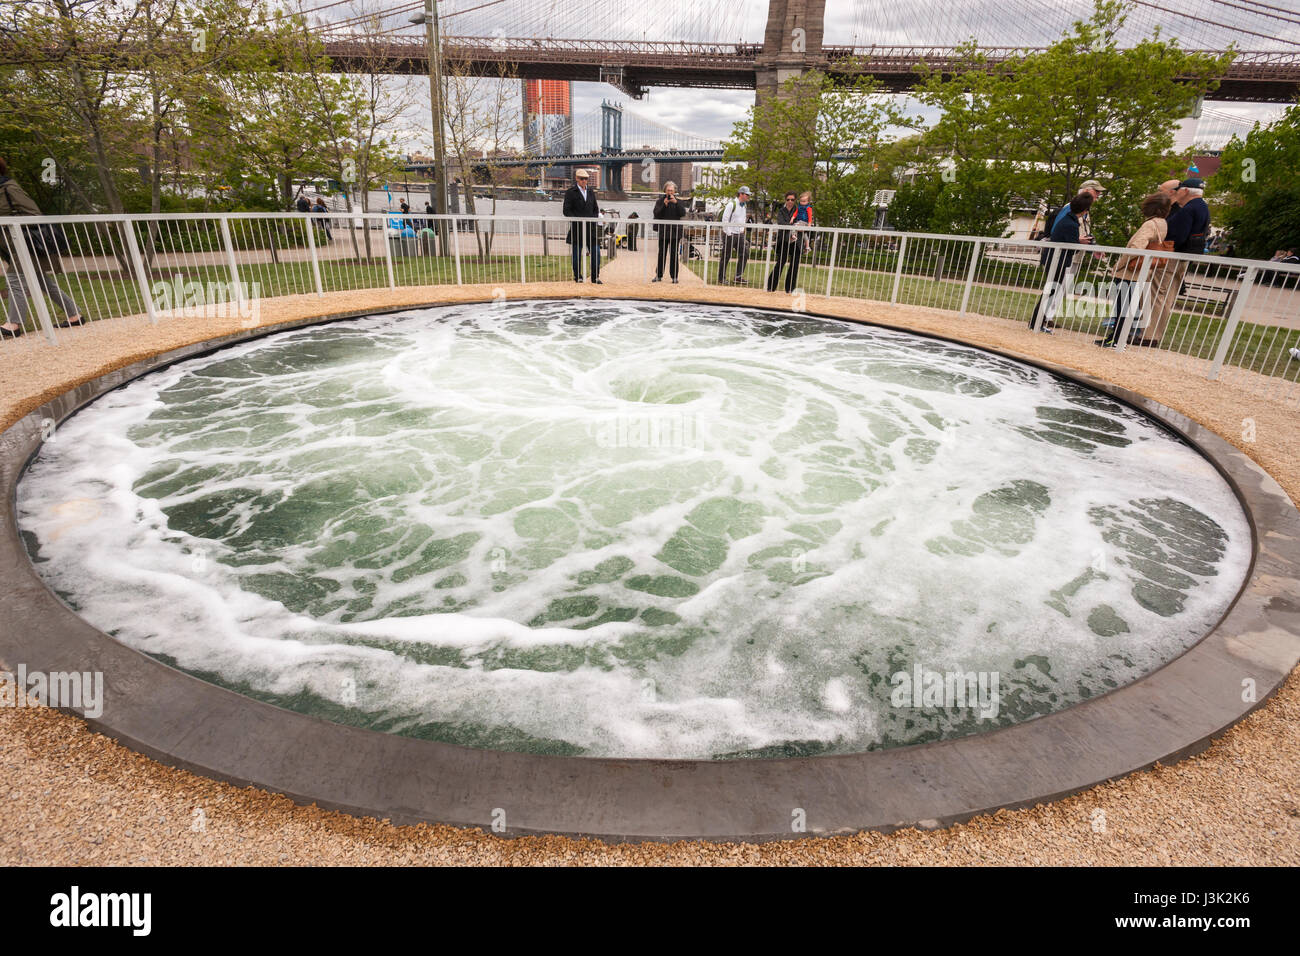 Visitors to Brooklyn Bridge Park in New York on Wednesday, May 3, 2017 are enthralled by the artist Anish Kapoor's 'Descension' installation. The artwork consists of a continuously swirling vortex of water in a 26 foot wide pool hypnotically commanding the attention of the viewer as it is reminiscent of being sucked into the depths. The installation is funded by the Public Art fund which is celebrating its 40th anniversary. 'Descension' will be on view until September 10, 2017 on Pier 1 in the park. (© Richard B. Levine) Stock Photo